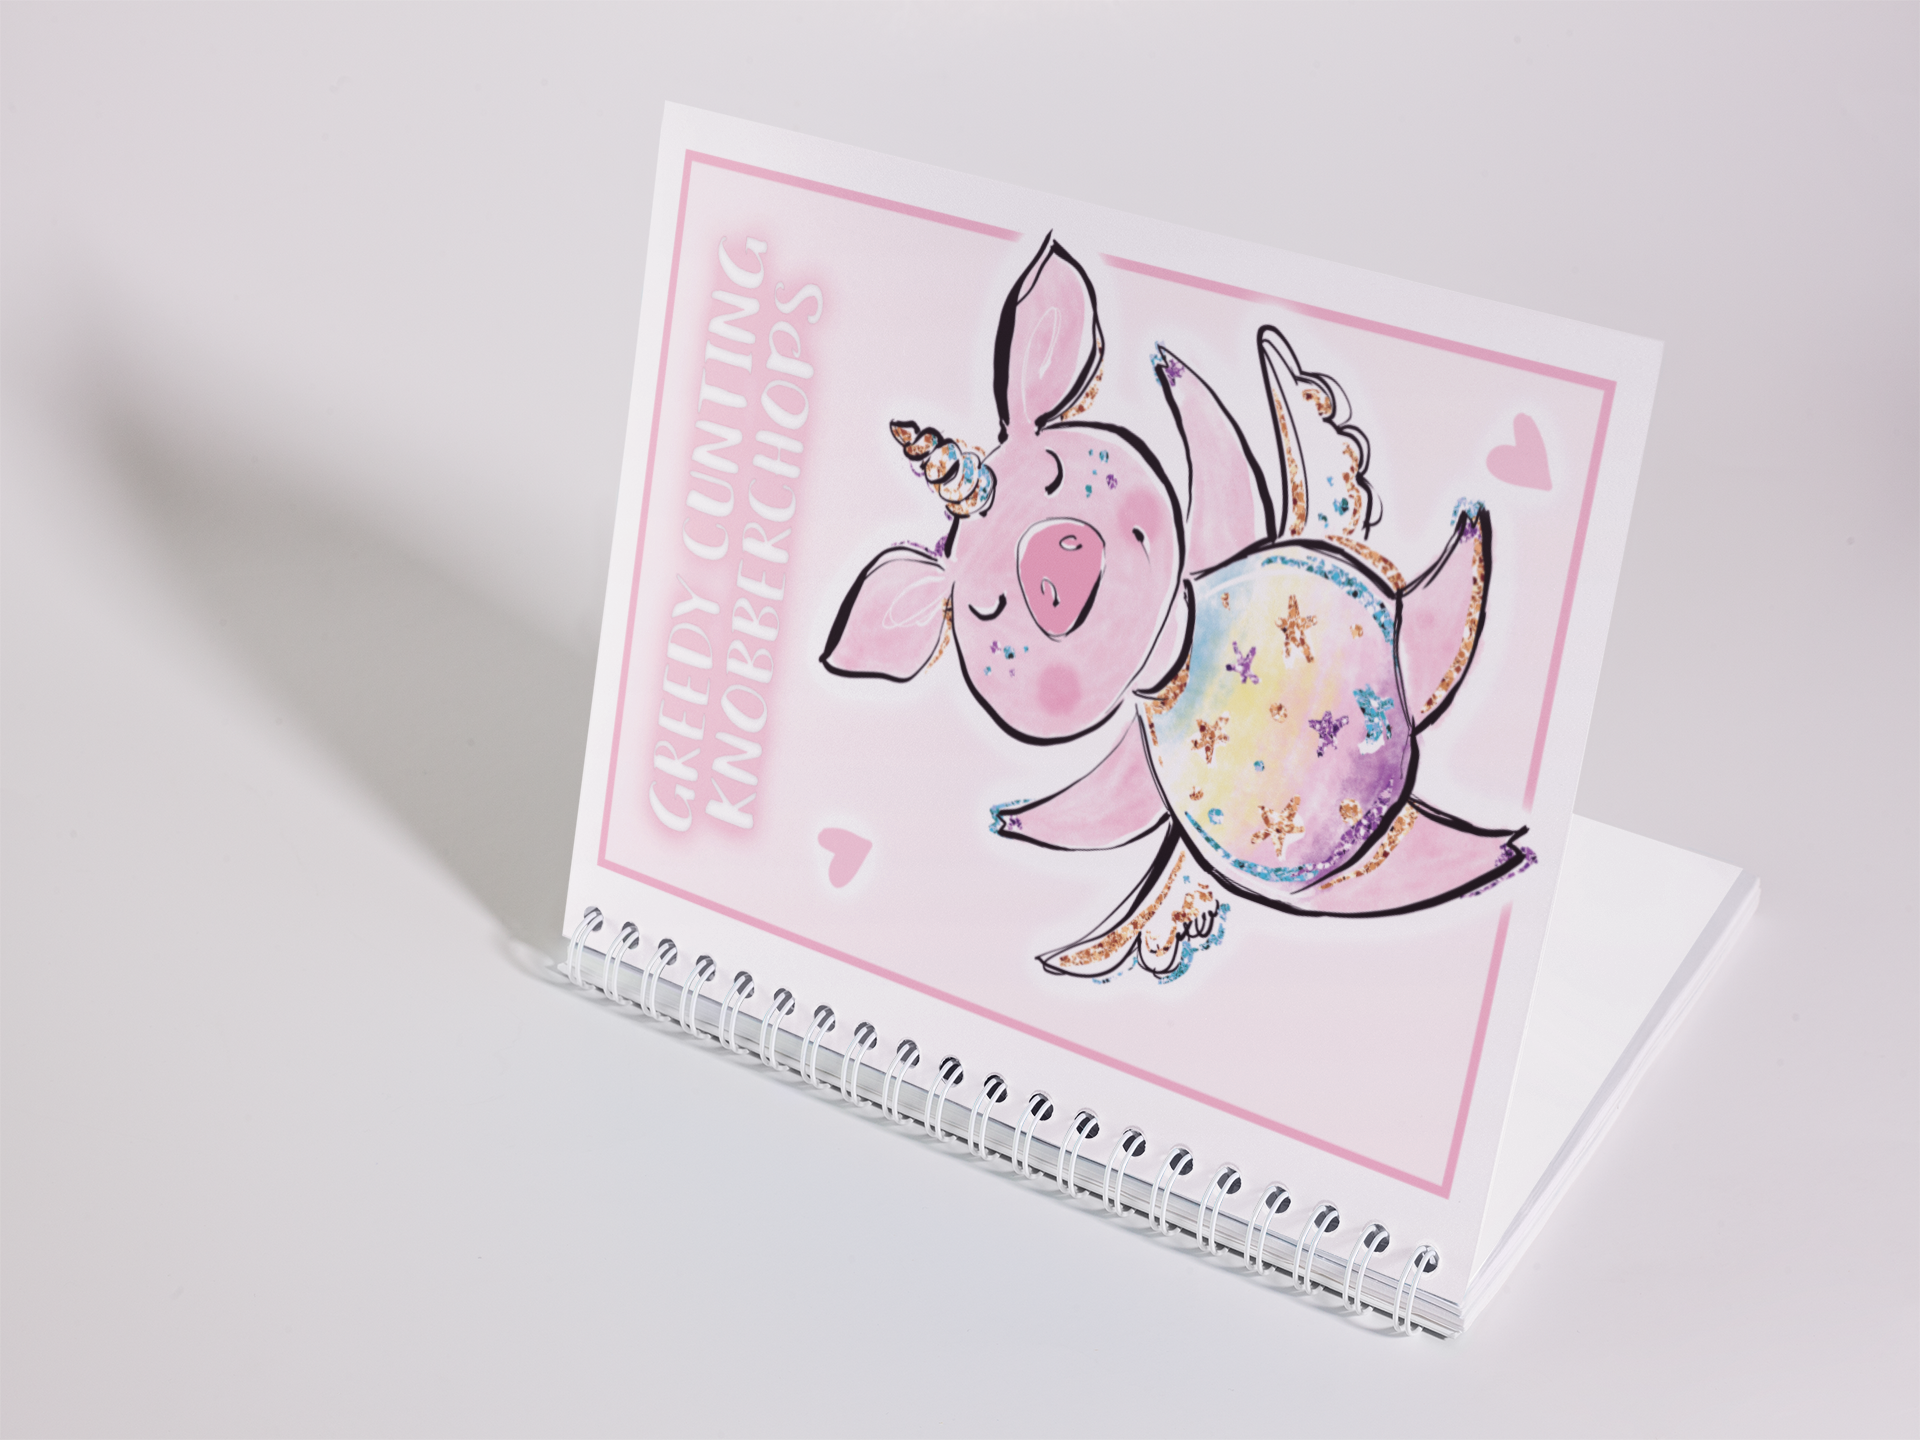 A5 food diary with daily food log pages containing sections for snacks, exercise & water intake. The cover features a fun pink design with a unicorn pig & a quote to the top which reads 'greedy cunting knobberchops'. 